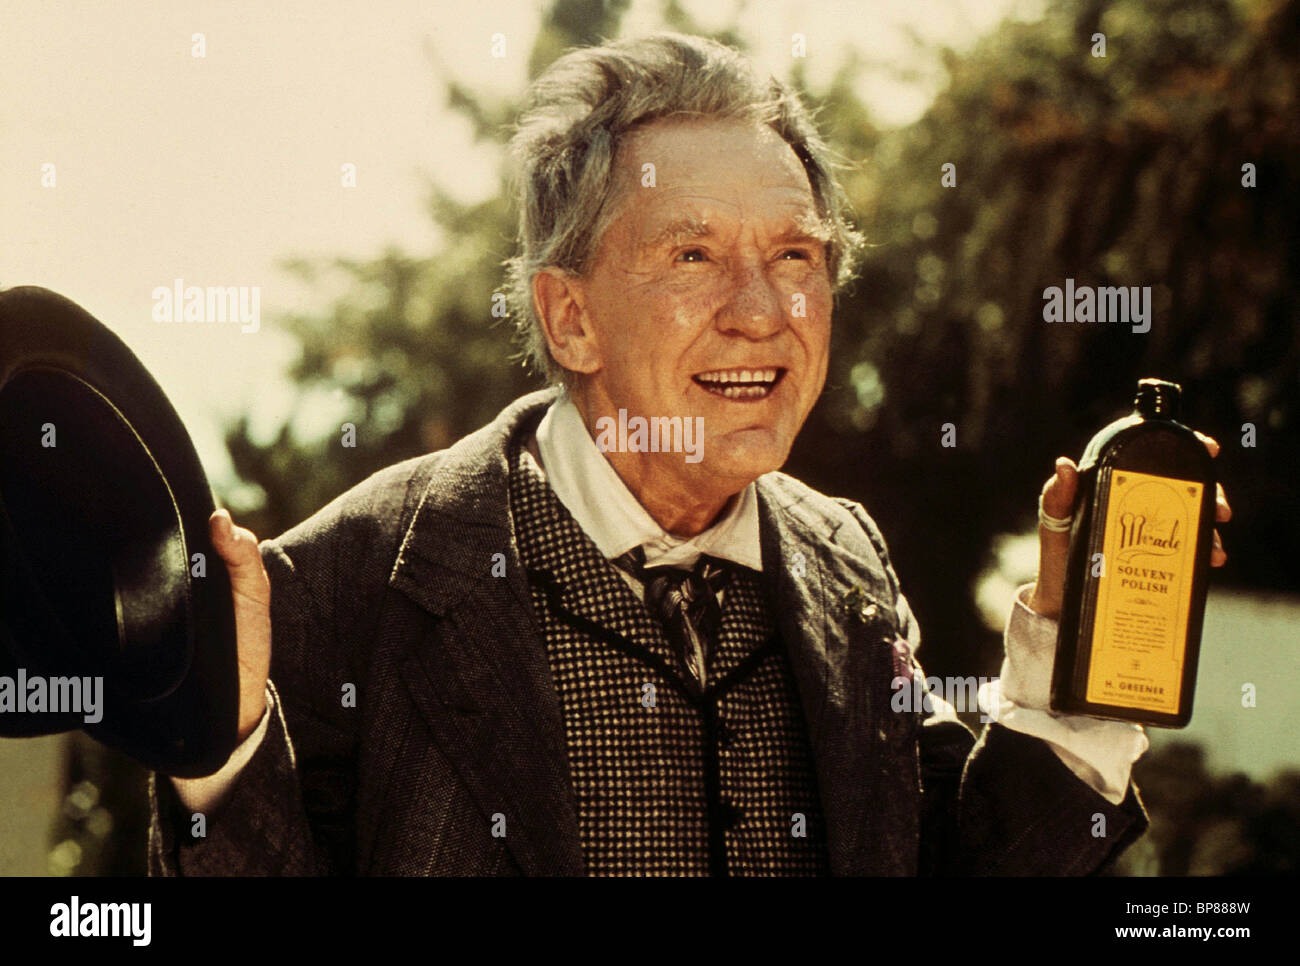 burgess-meredith-the-day-of-the-locust-1